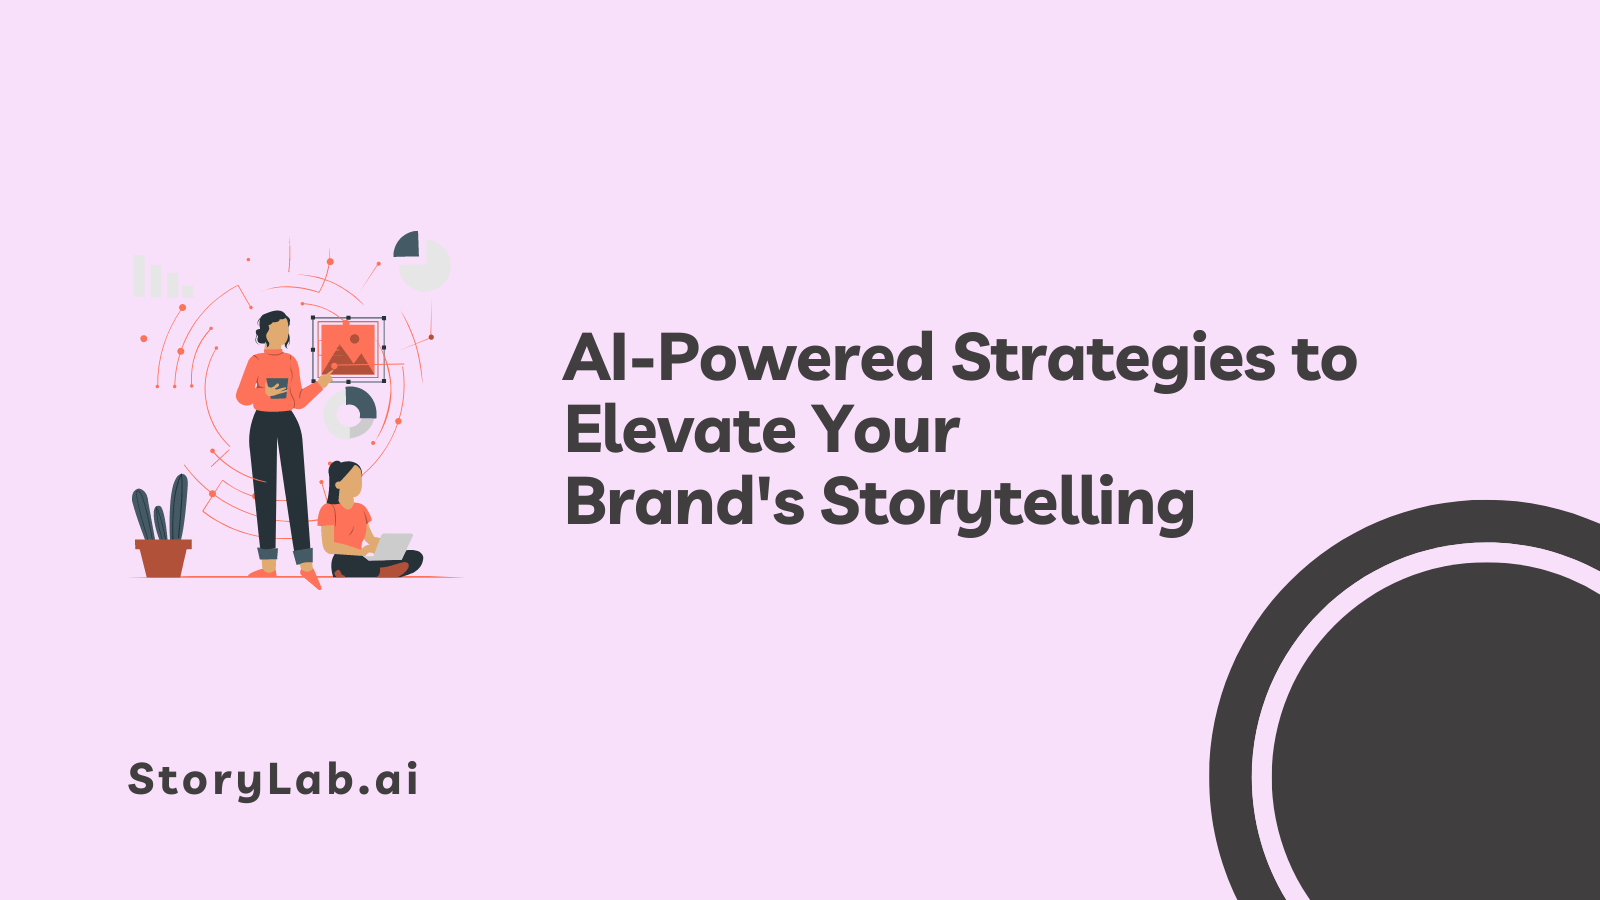 AI-Powered Strategies to Elevate Your Brand's Storytelling